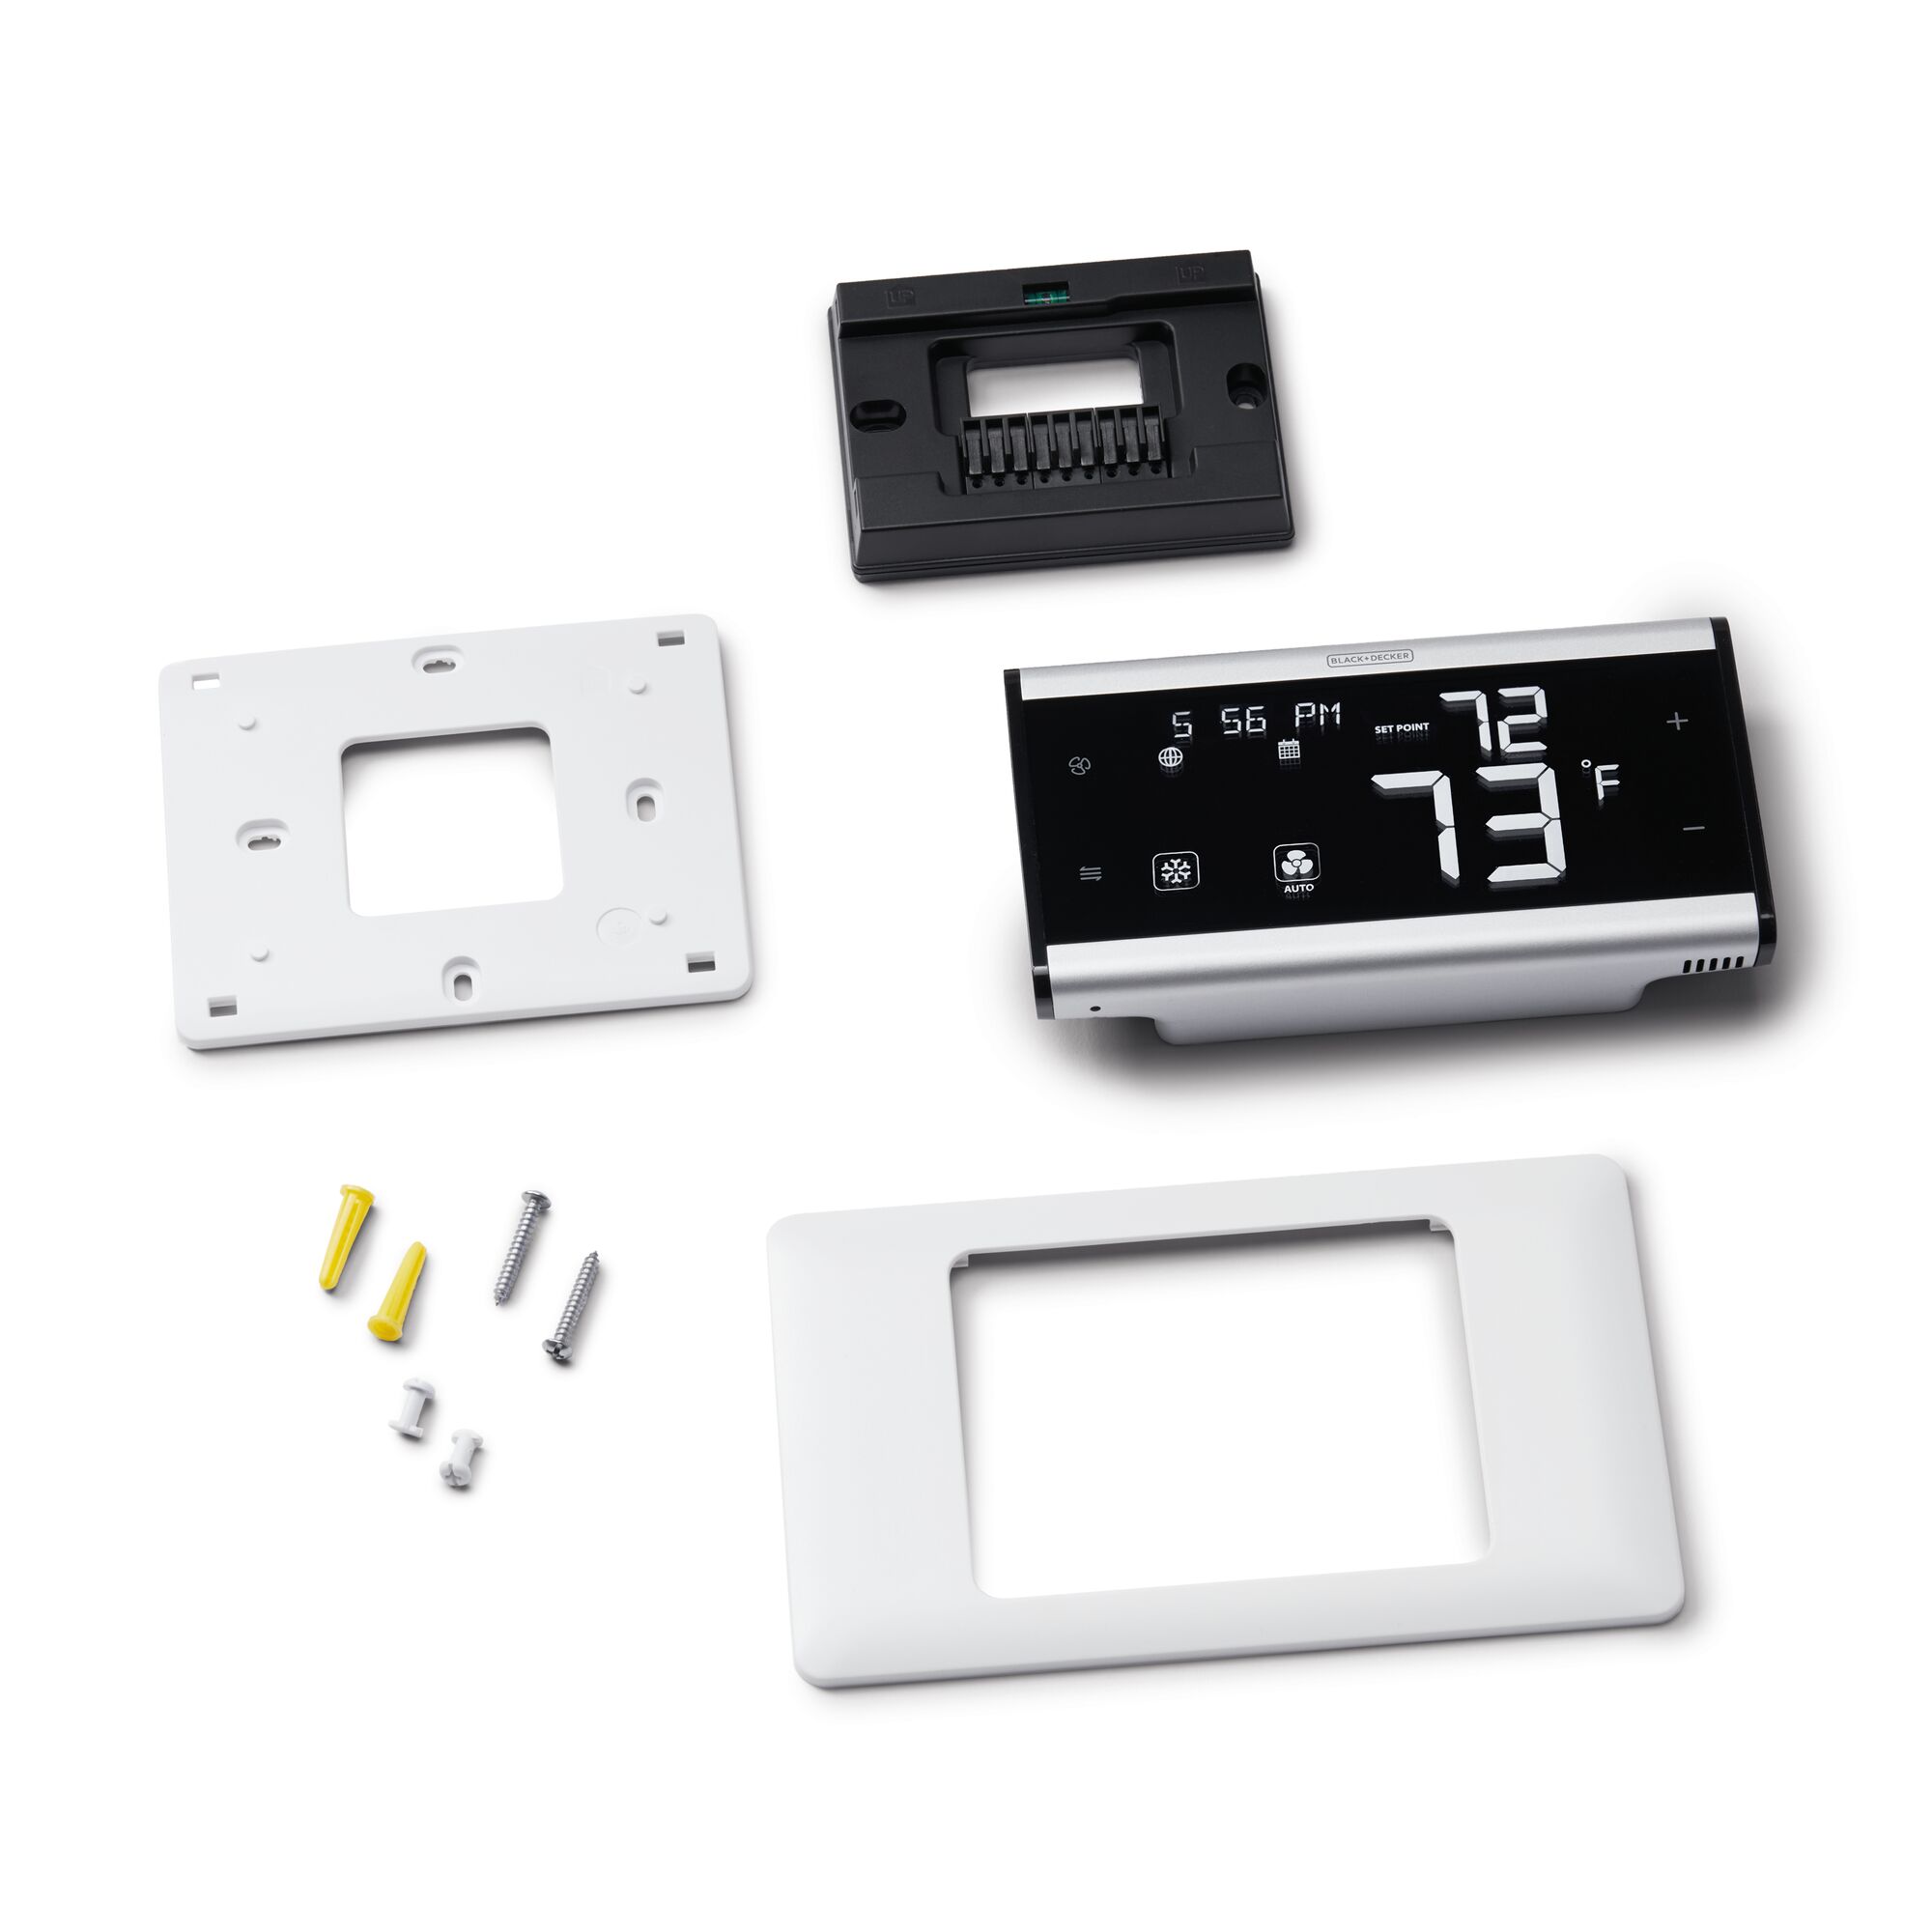 Kit elements for the BLAKC+DECKER Thermostat Pro